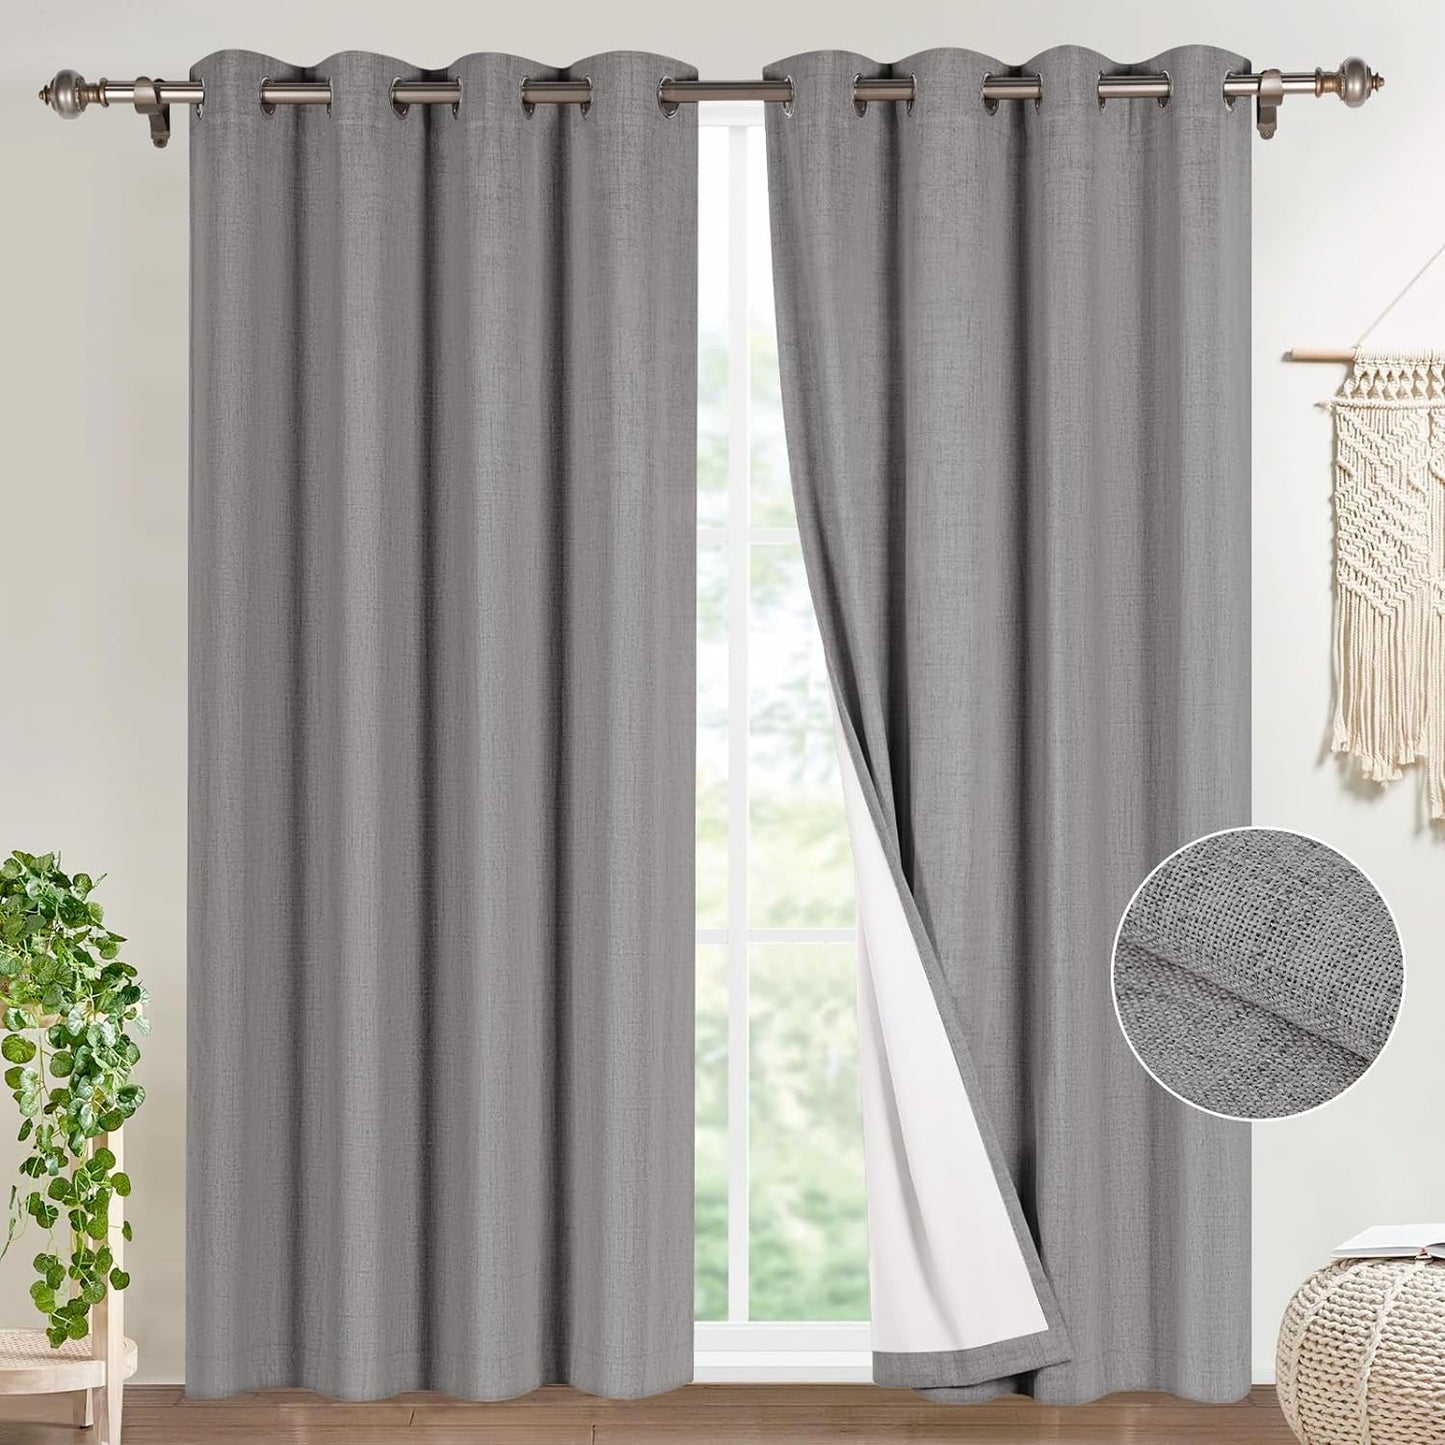 Timeles 100% Blackout Window Curtains 84 Inch Length for Living Room Textured Linen Curtains Sliver Grommet Pinch Pleated Room Darkening Curtain with White Liner/Ties(2 Panel W52 X L84, Ivory)  Timeles Grey W52" X L84" 